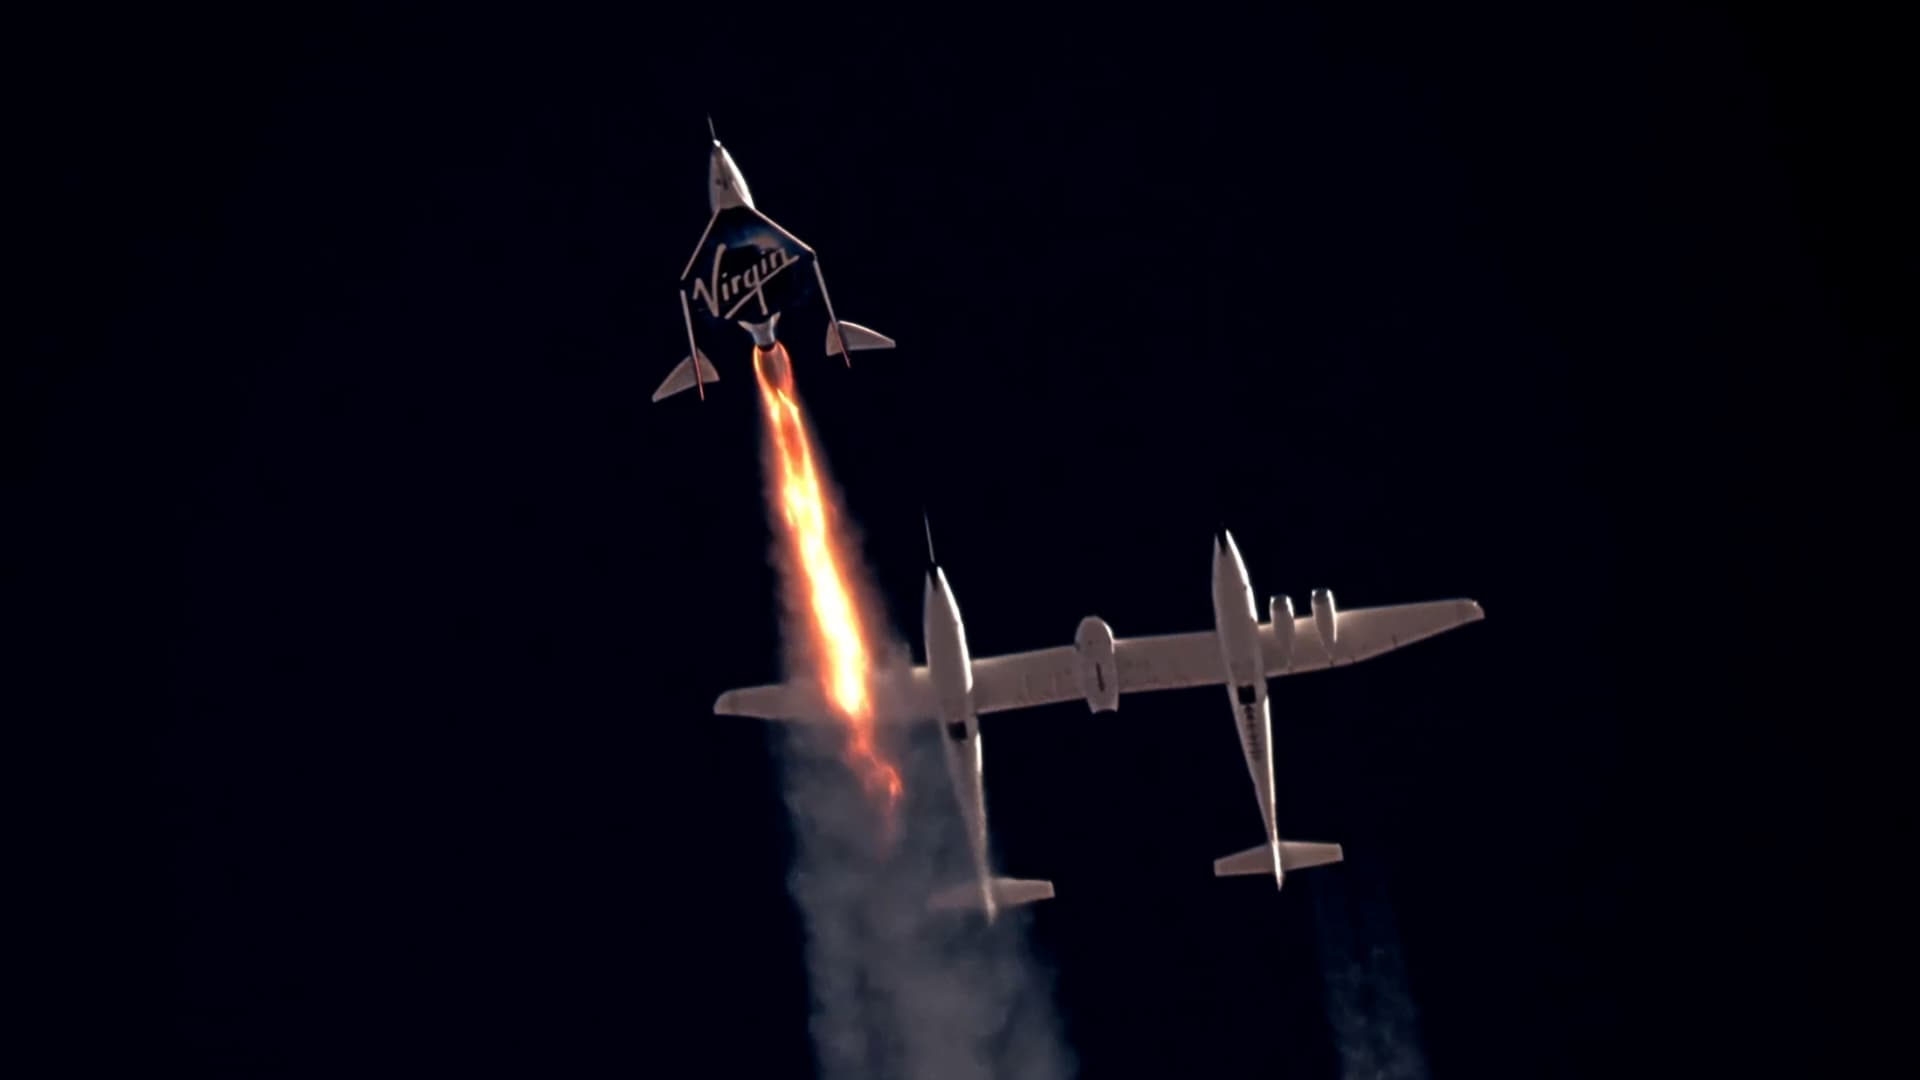 Virgin Galactic's passenger rocket plane VSS Unity, carrying Richard Branson and crew, begins its ascent to the edge of space above Spaceport America near Truth or Consequences, New Mexico, U.S. July 11, 2021 in a still image from video.